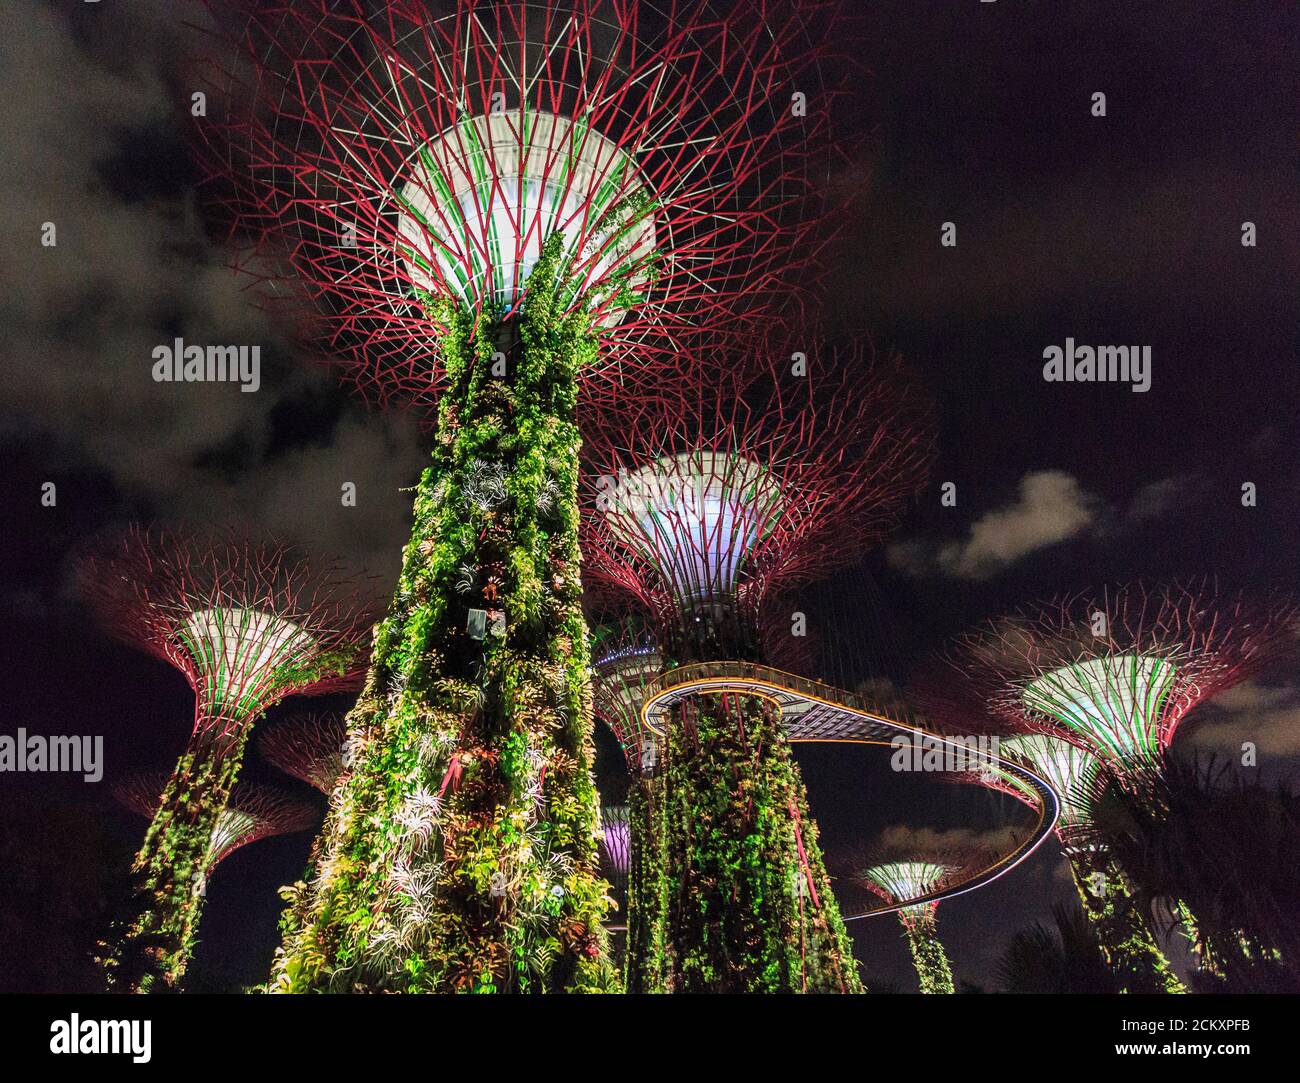 Lit SuperTrees seen at night at Gardens by the Bay, a $1 billion park on reclaimed land in central Singapore. Two huge domes enclose gardens, one with drier Mediterranean plants including varieties of cactus, the other a tropical garden with a 138-foot tall “Cloud Mountain” that is circled by a walkway. The main feature of Gardens by the Bay are the 18 SuperTrees, huge tree-like towers covered in exotic ferns, vines, orchids and bromeliads that are lit at night and become a sound and light show of shifting colors. There is also a 72-foot high elevated walkway, the OCBC Skyway, between two of t Stock Photo